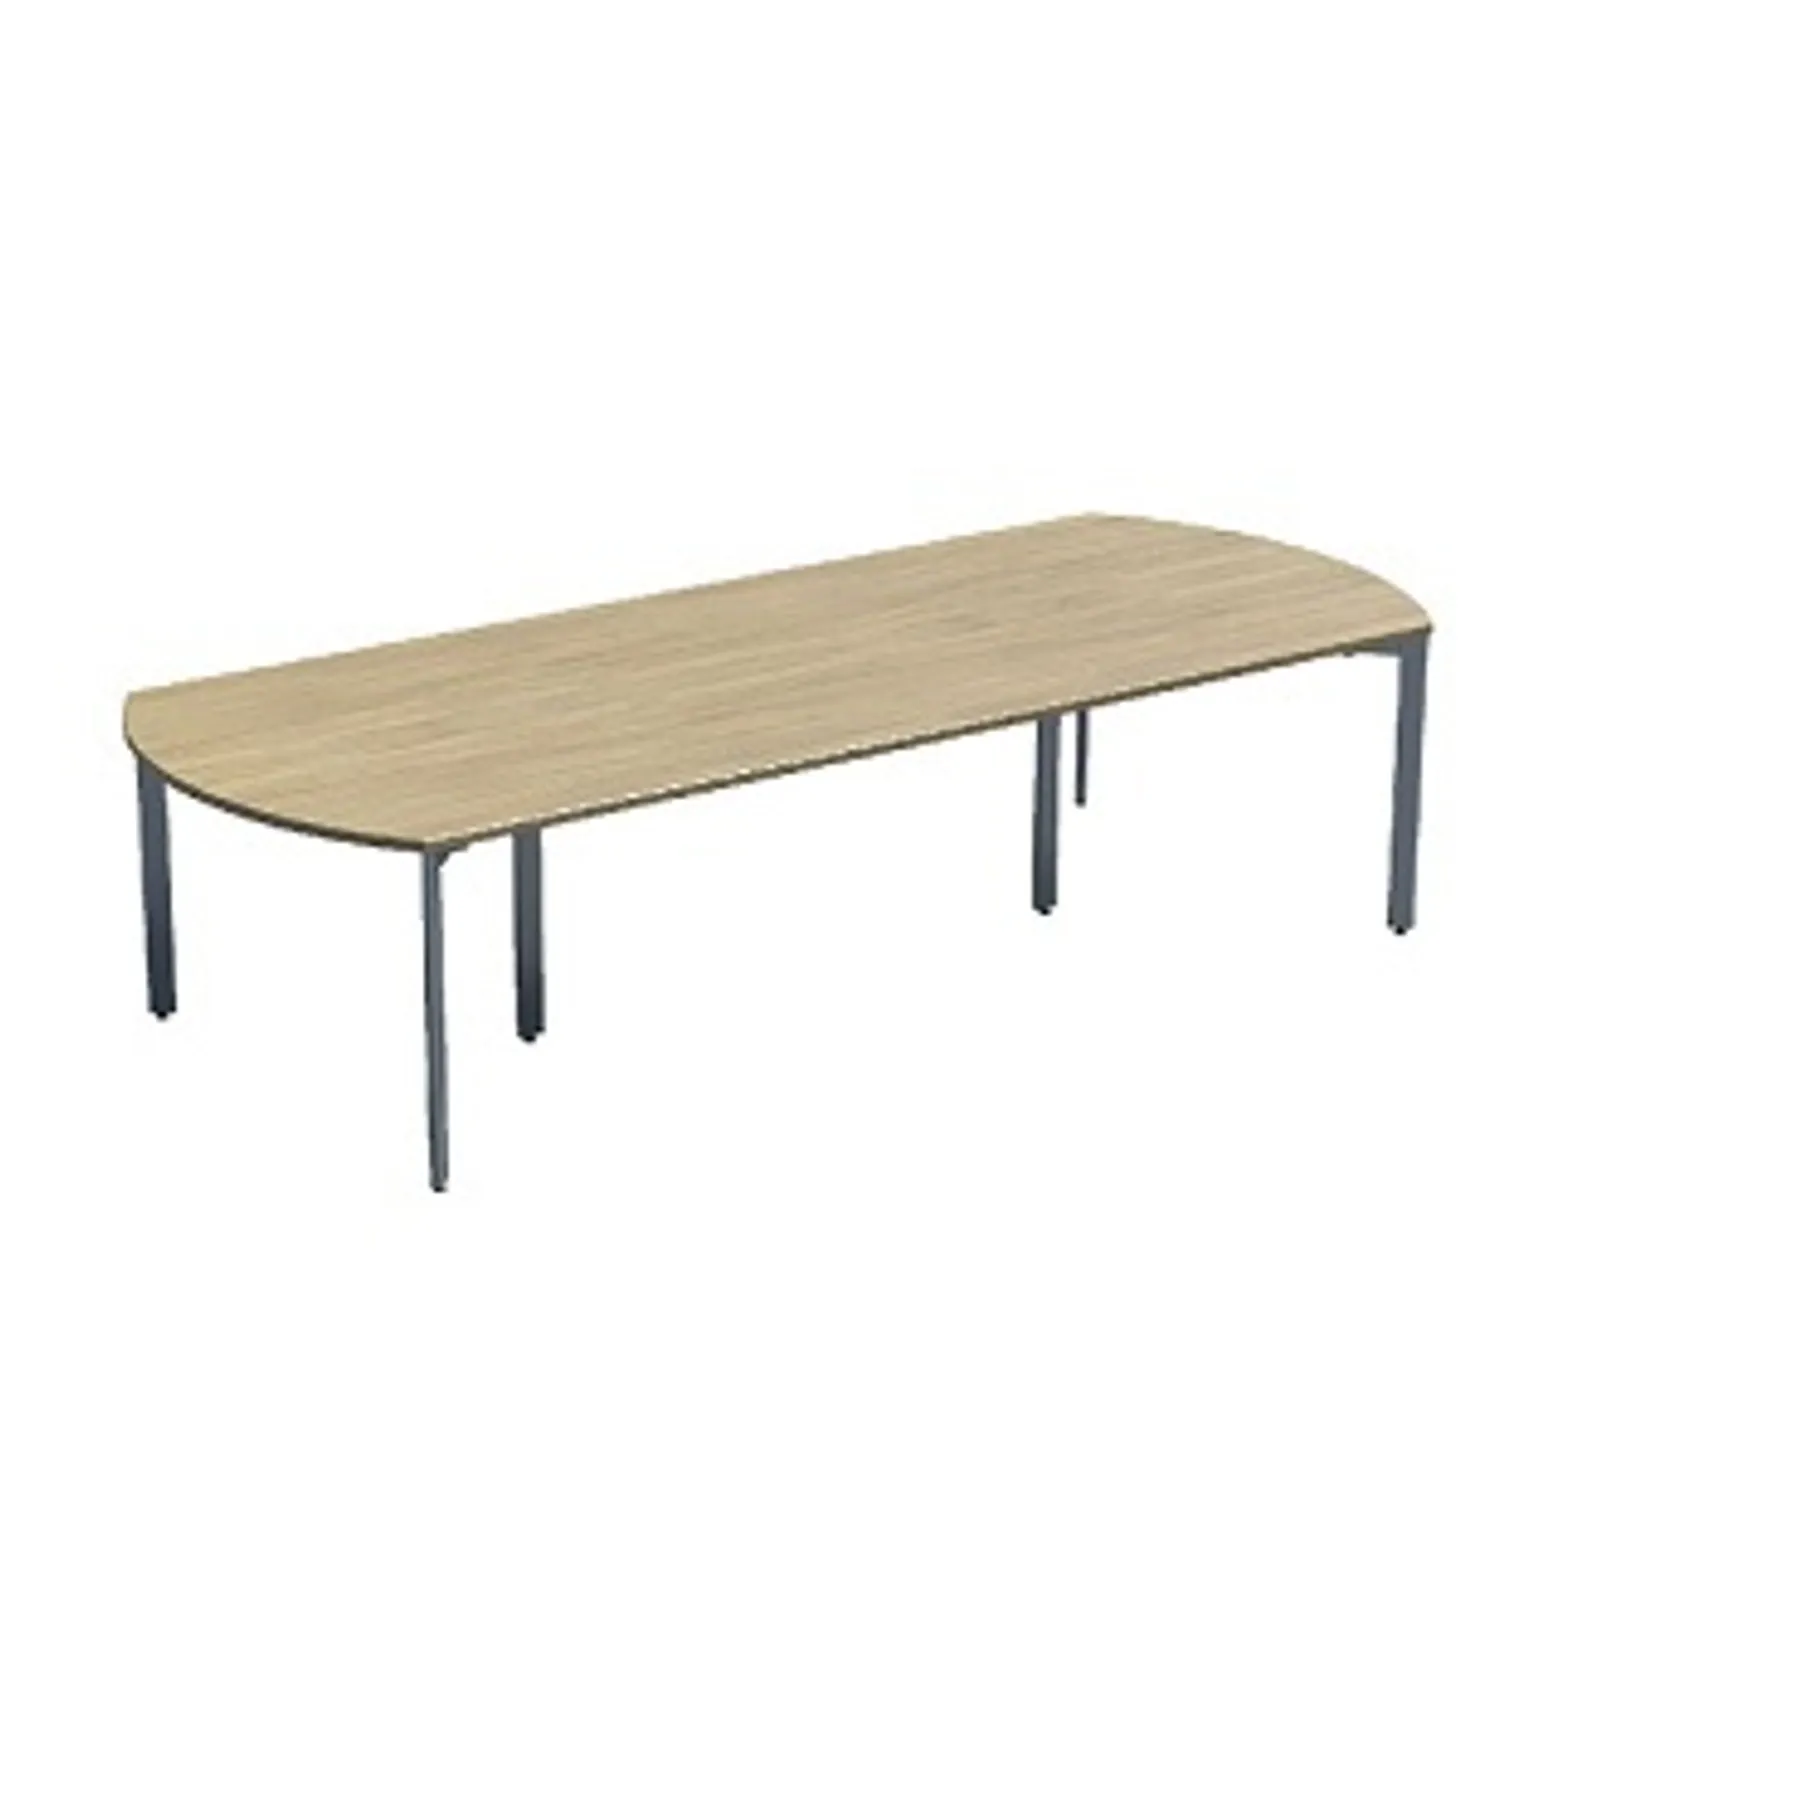 Lof Direct X Range Bow end Conference Table Sven Christiansen 2